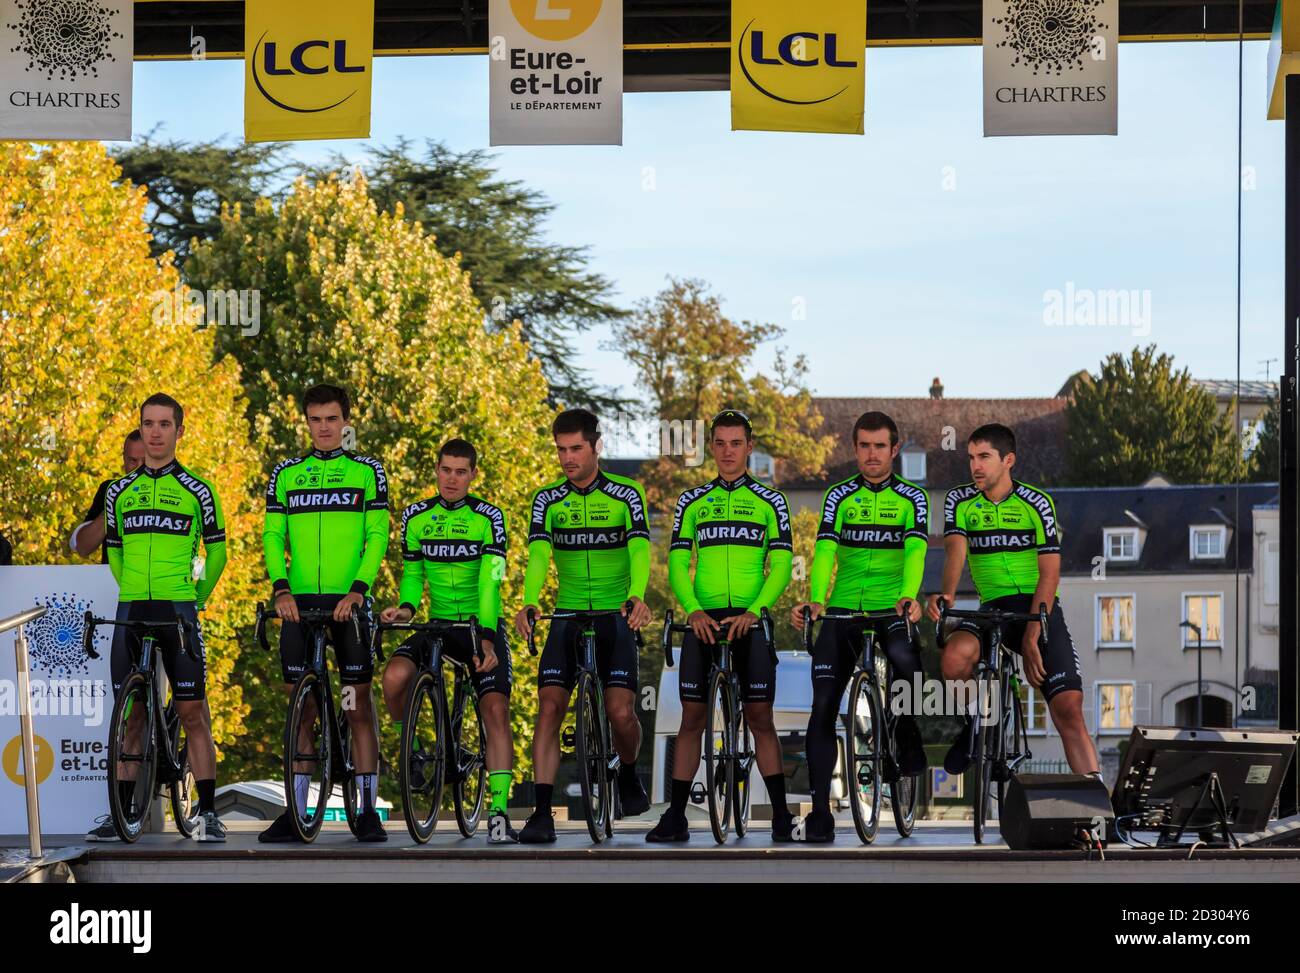 Chartres, France - October 13, 2019: Team Euskadi Basque Country-Murias is on the podium in Chartres, during the teams presentation before the autumn Stock Photo